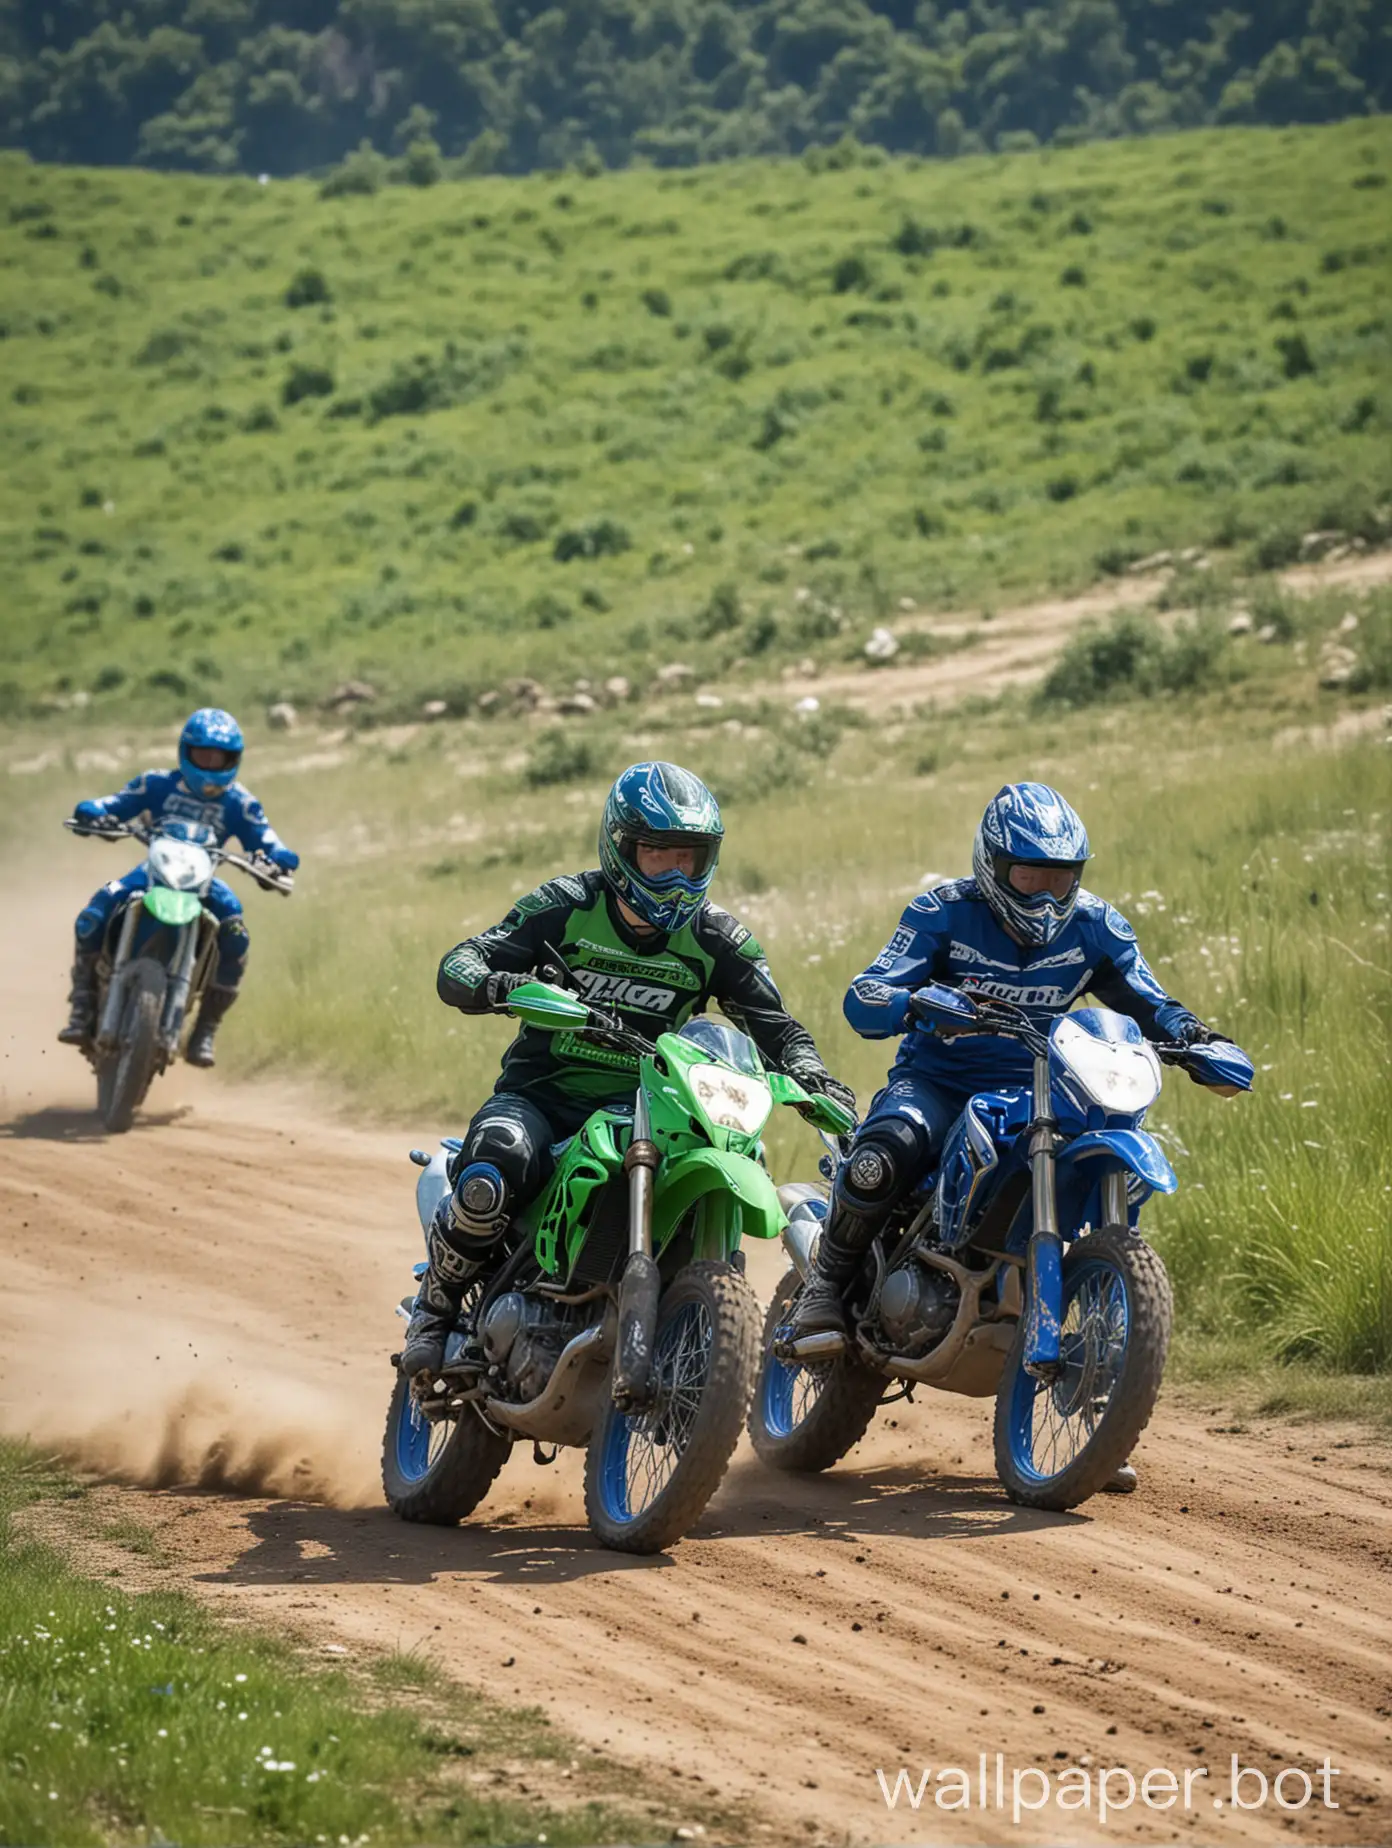 moto race, two bikers, green and blue